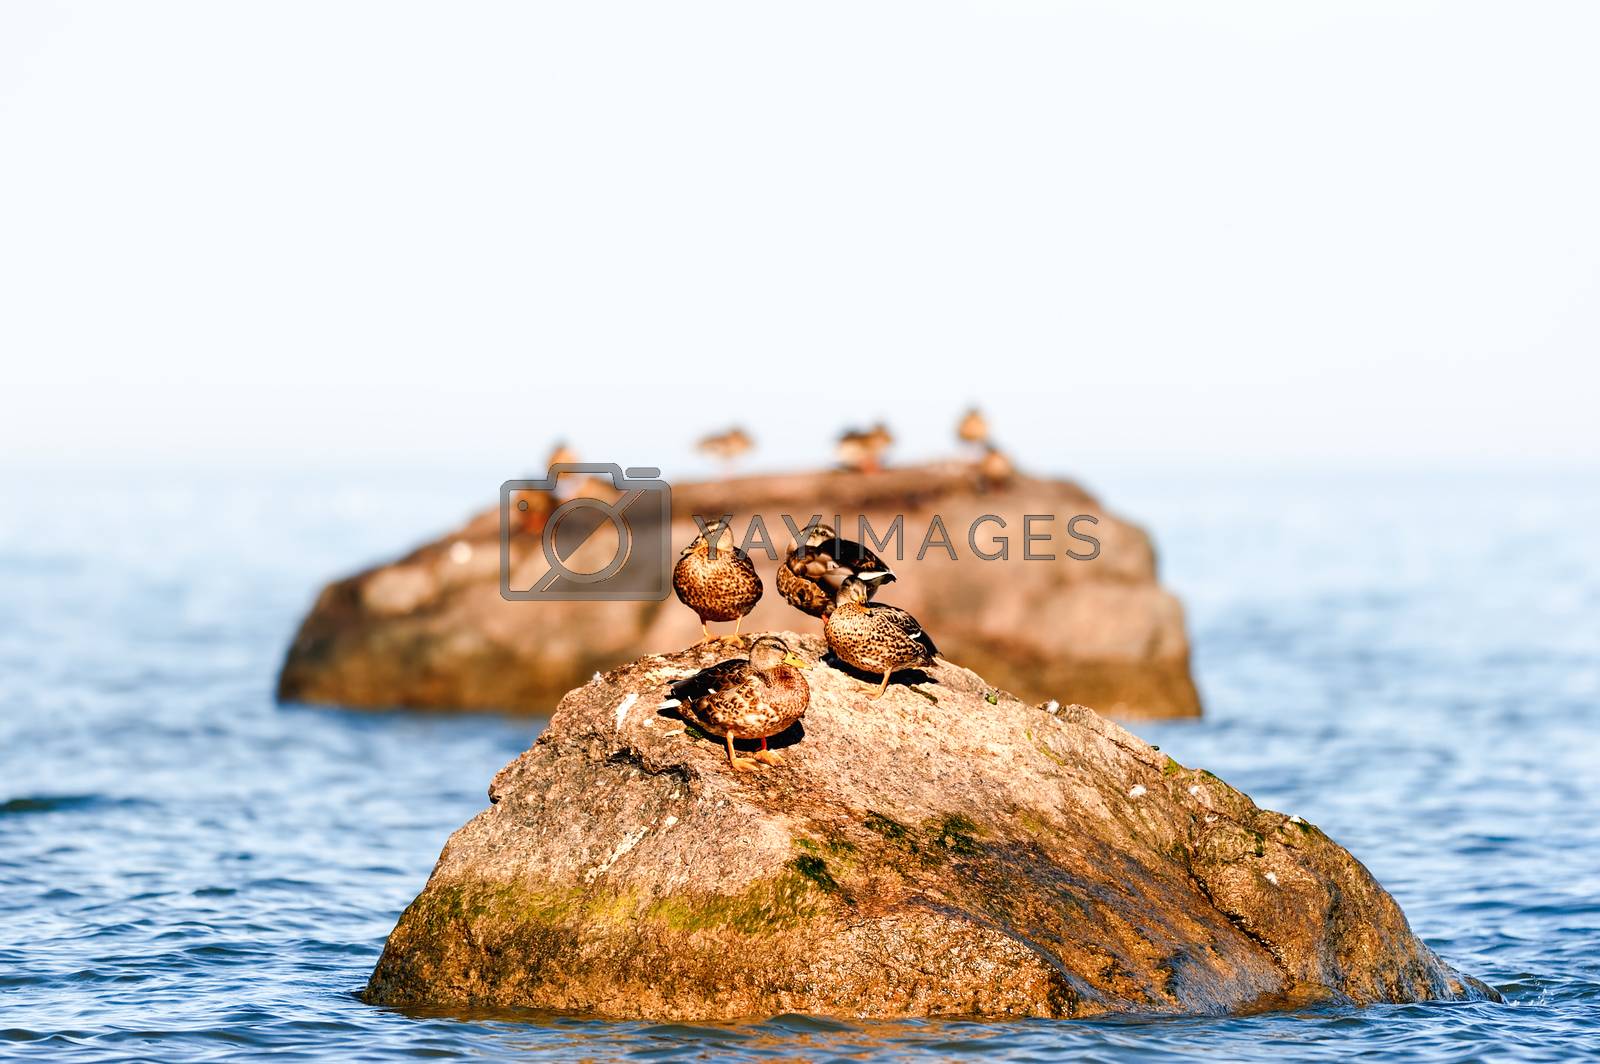 Royalty free image of Duck resting by styf22